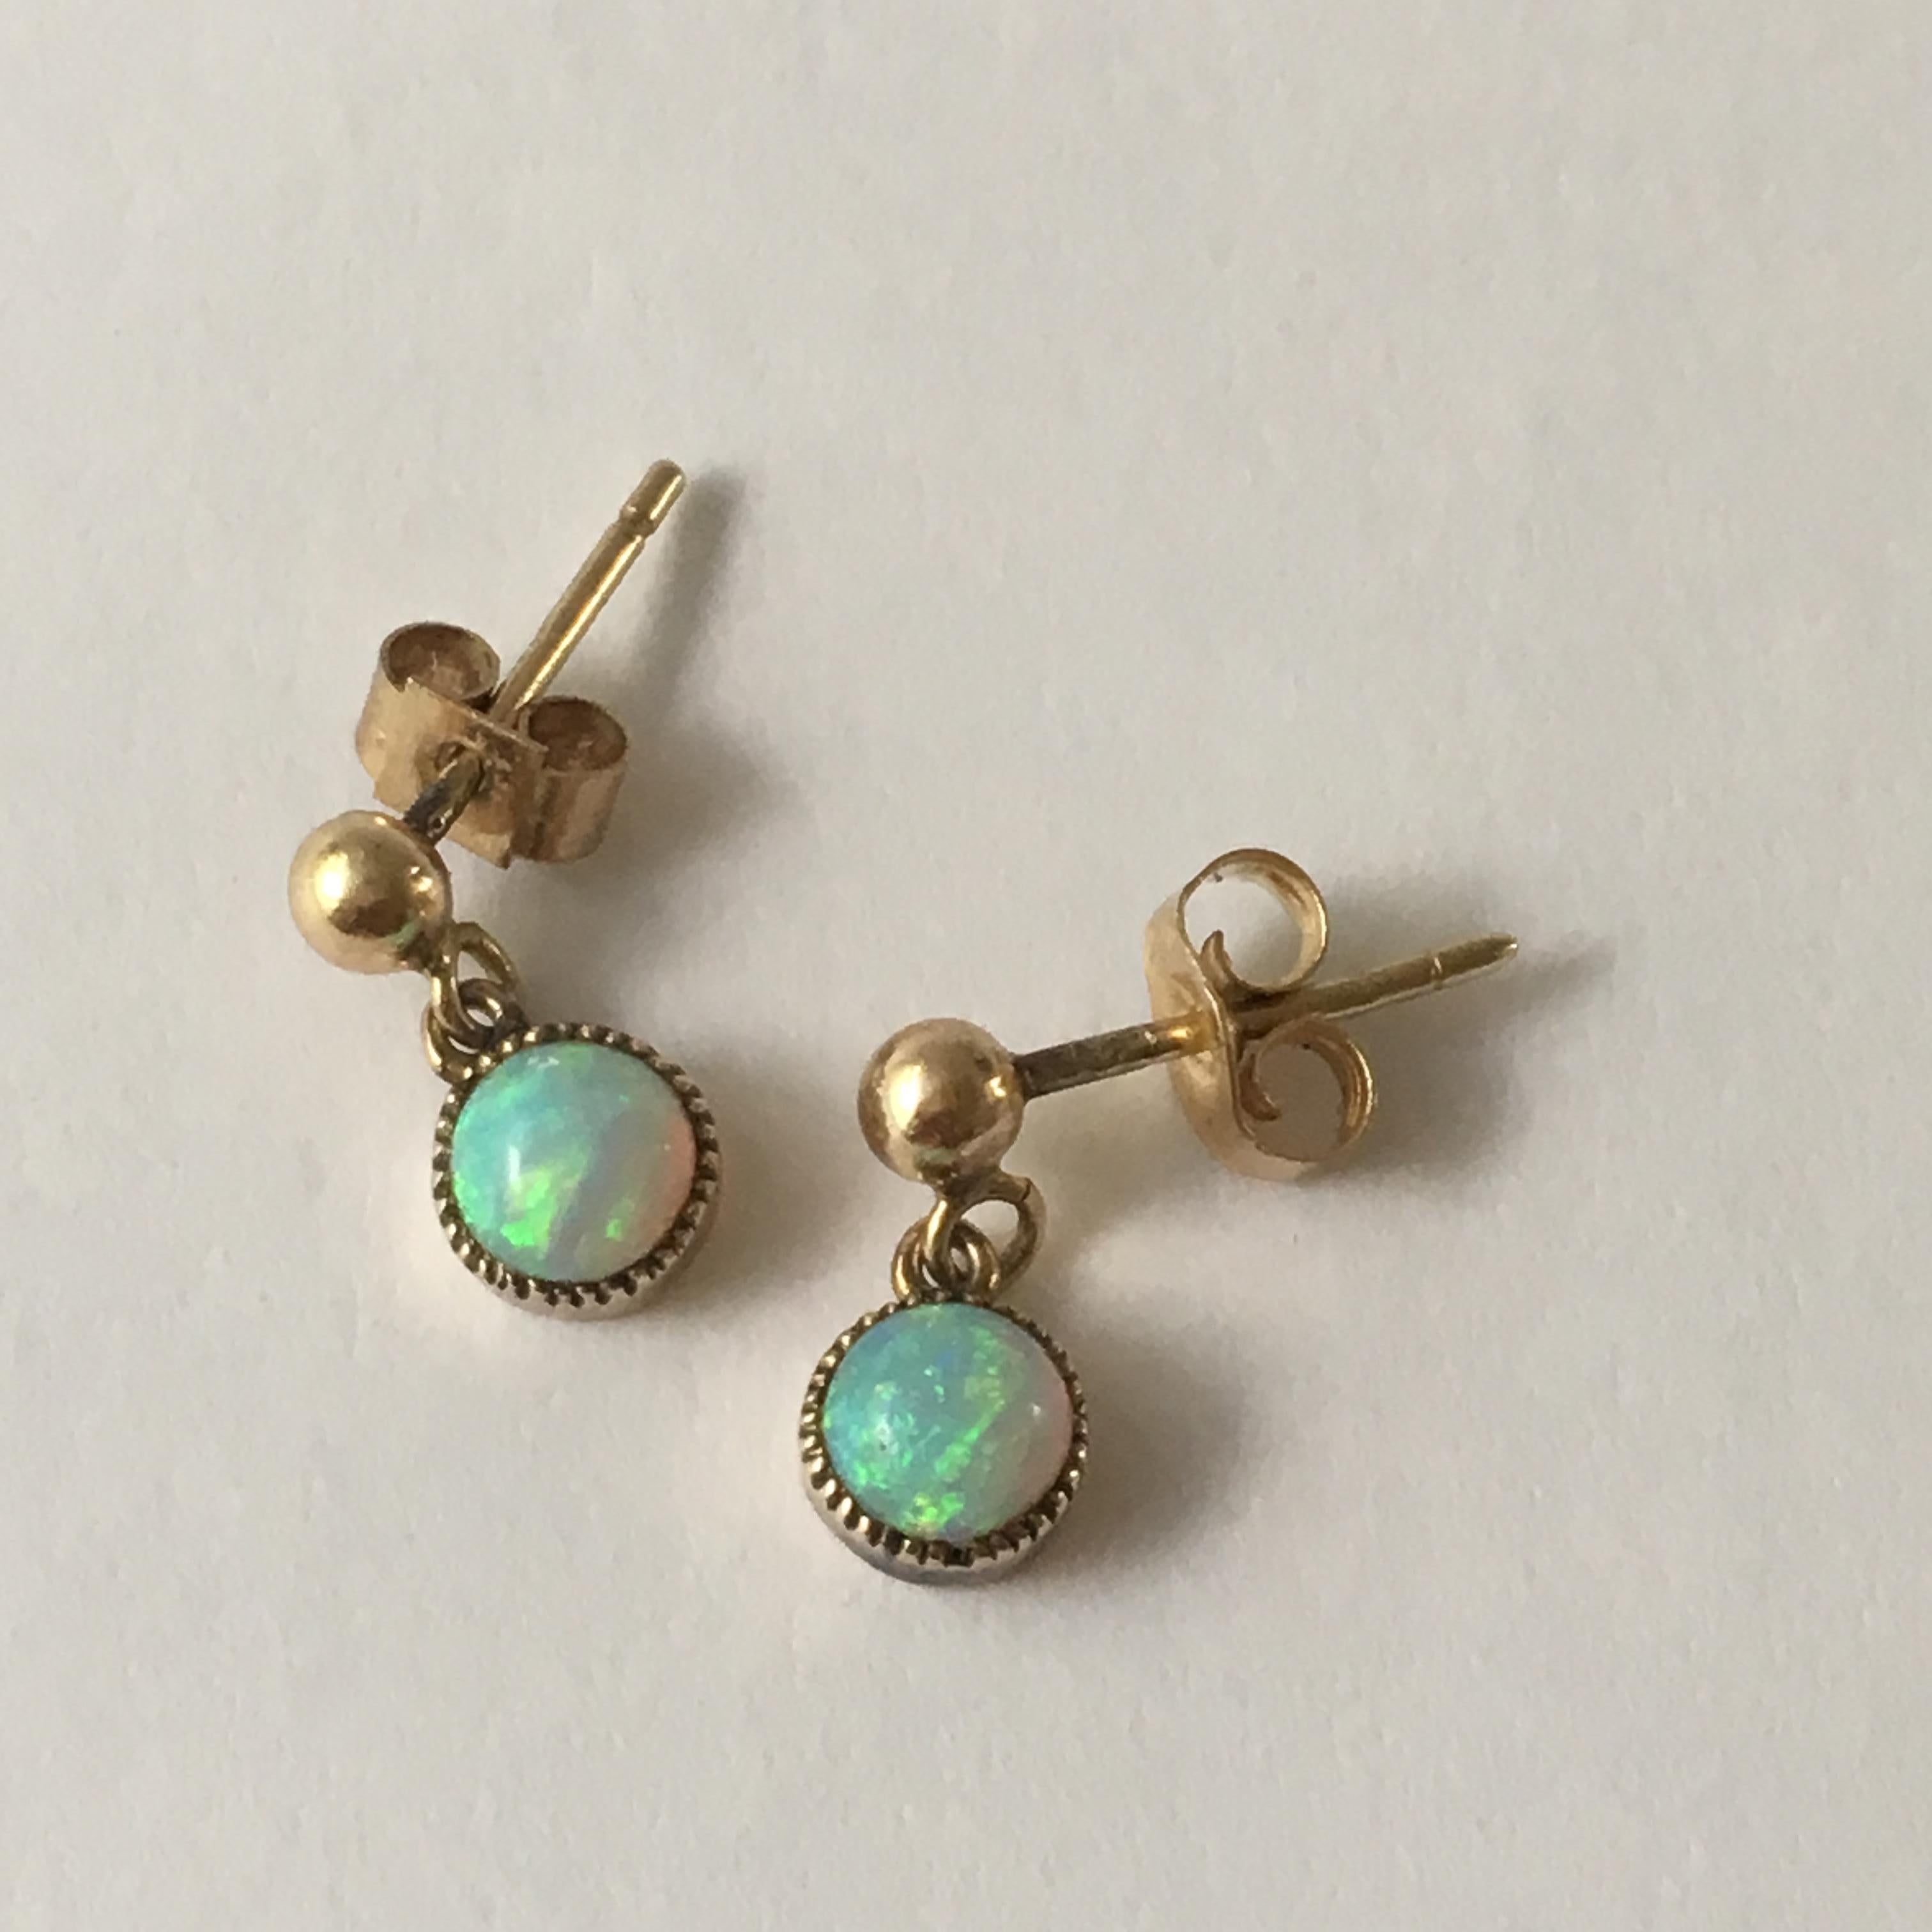 These beautiful, dainty opal drop earrings are extremely wearable and elegantly understated. They are stamped '9 375' for 9ct gold, so we can date them as pre-1978, but the exact letter date and assay office is no longer legible due to wear.  The